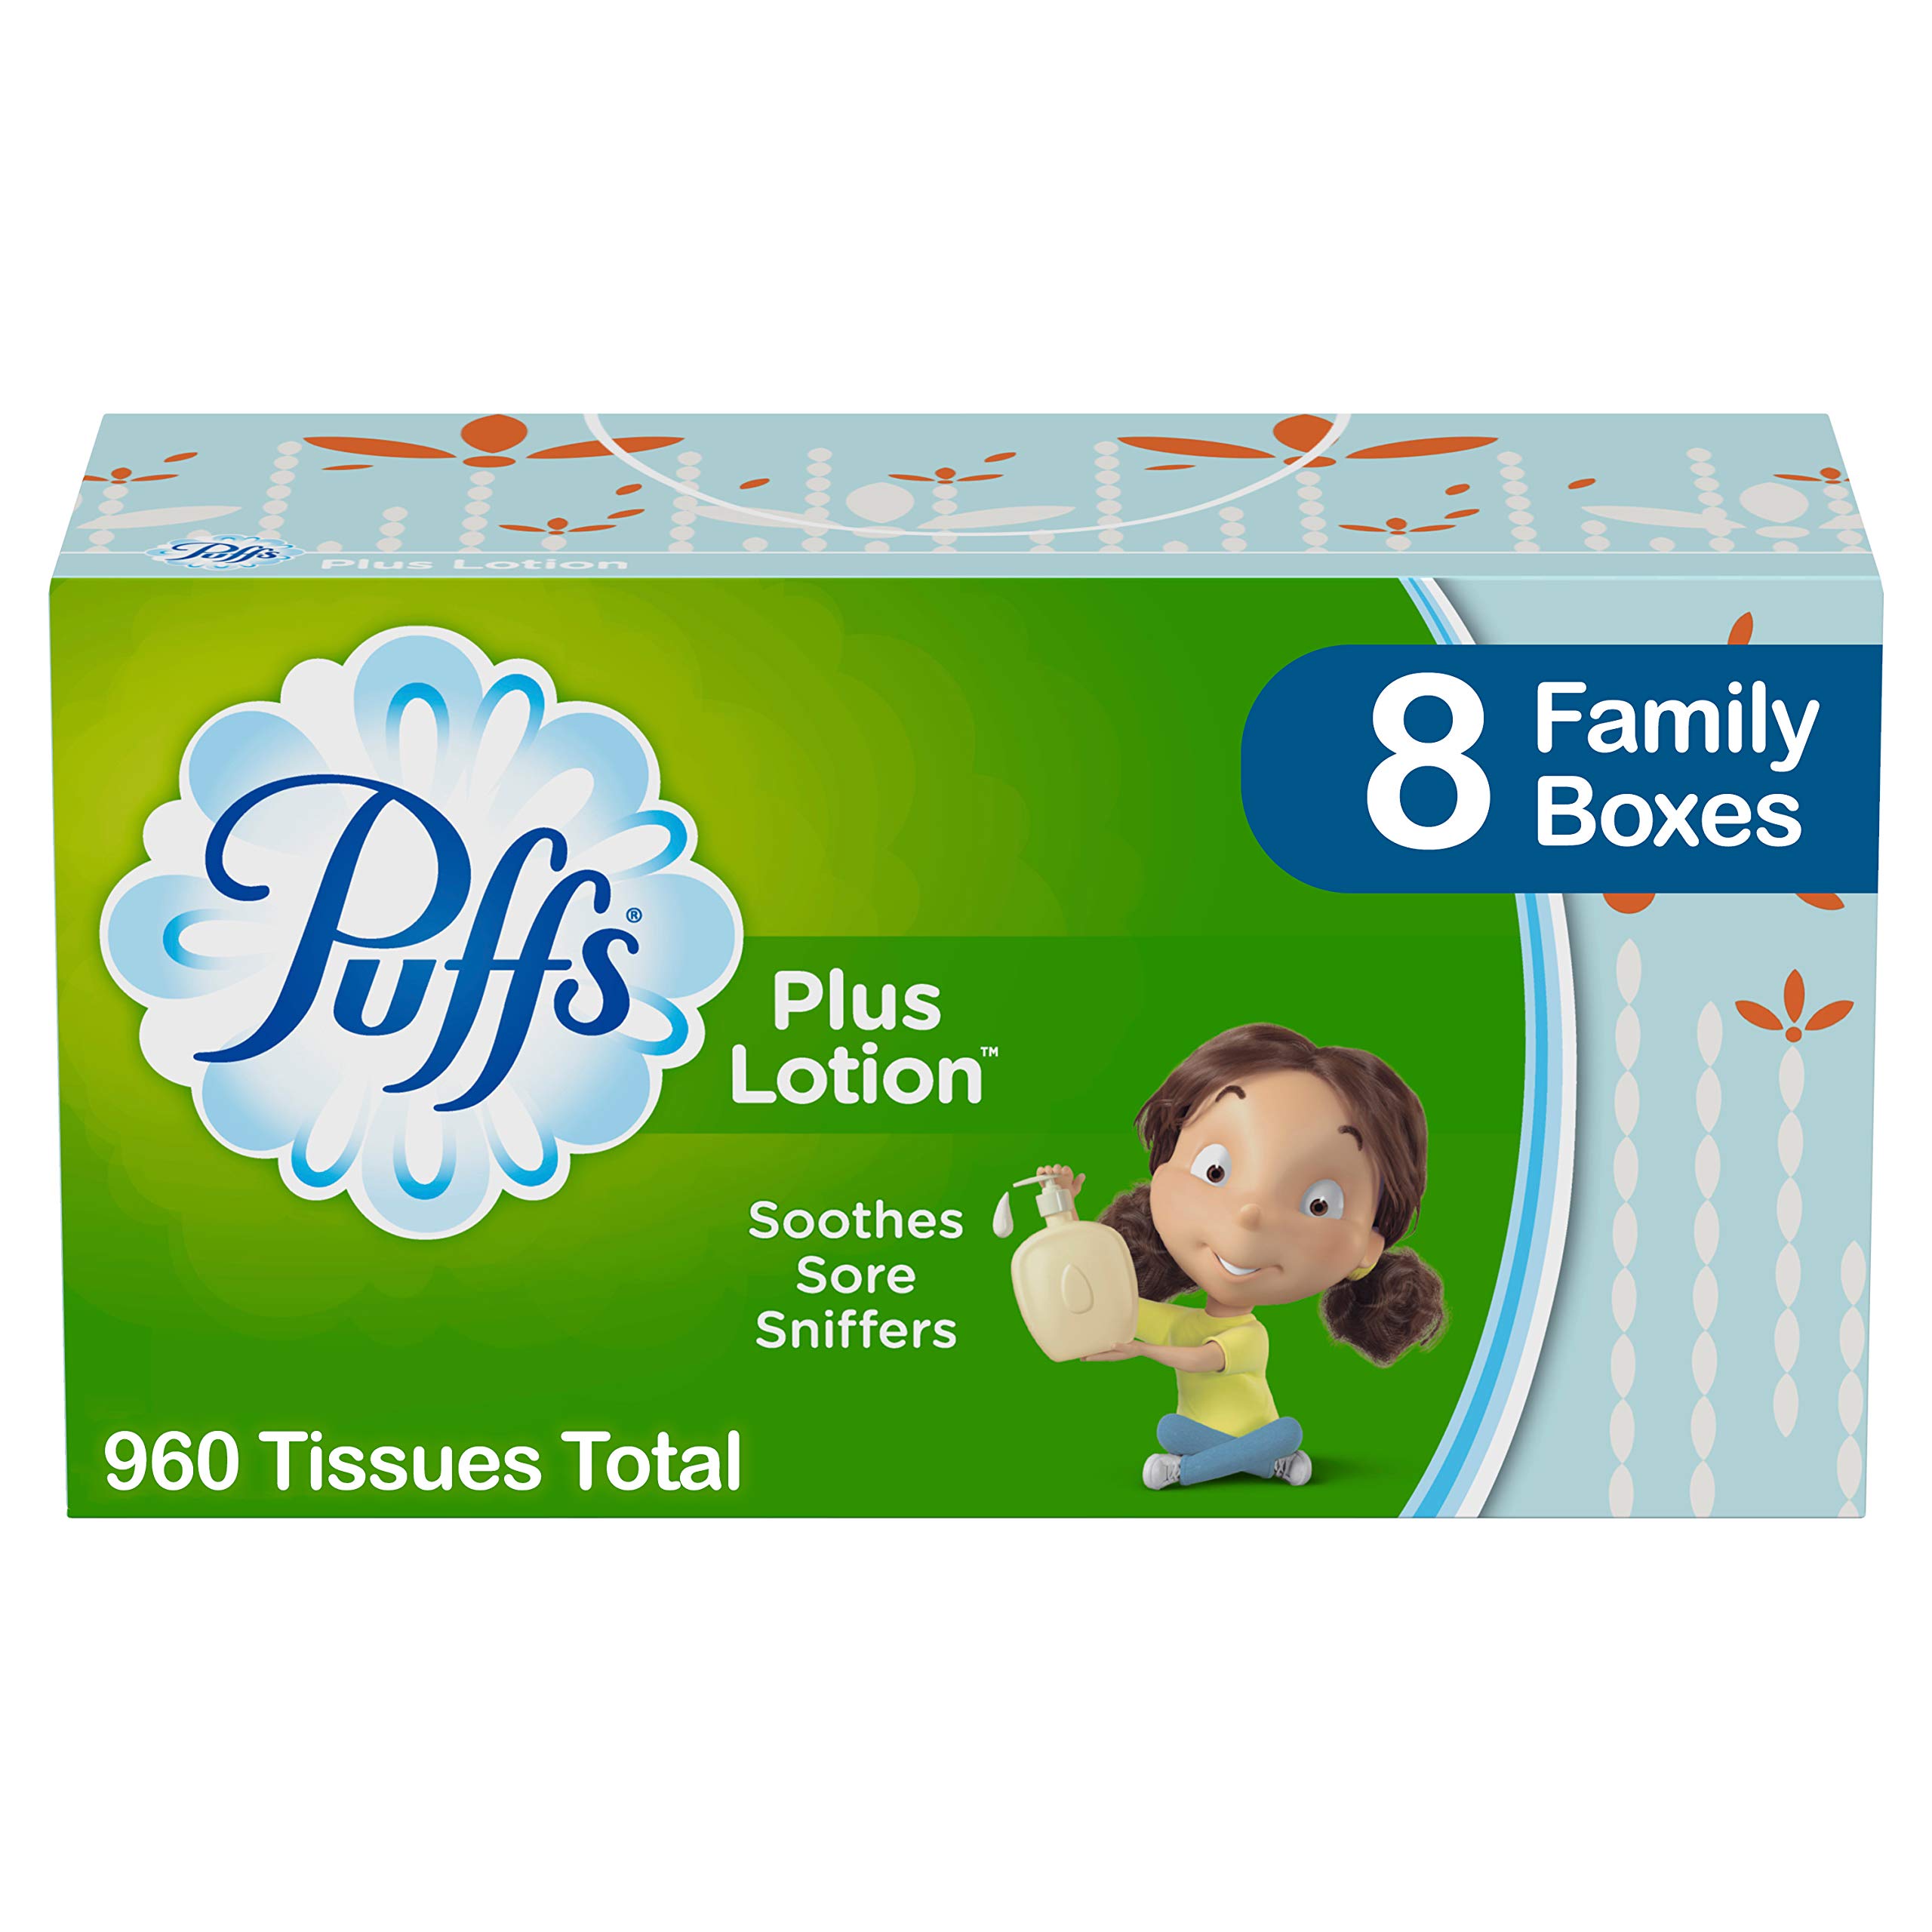 *Back* 8-Pack 120-Sheet Puffs Plus Lotion Facial Tissues 3 for $24.38 ($8.13 each) + Free Shipping